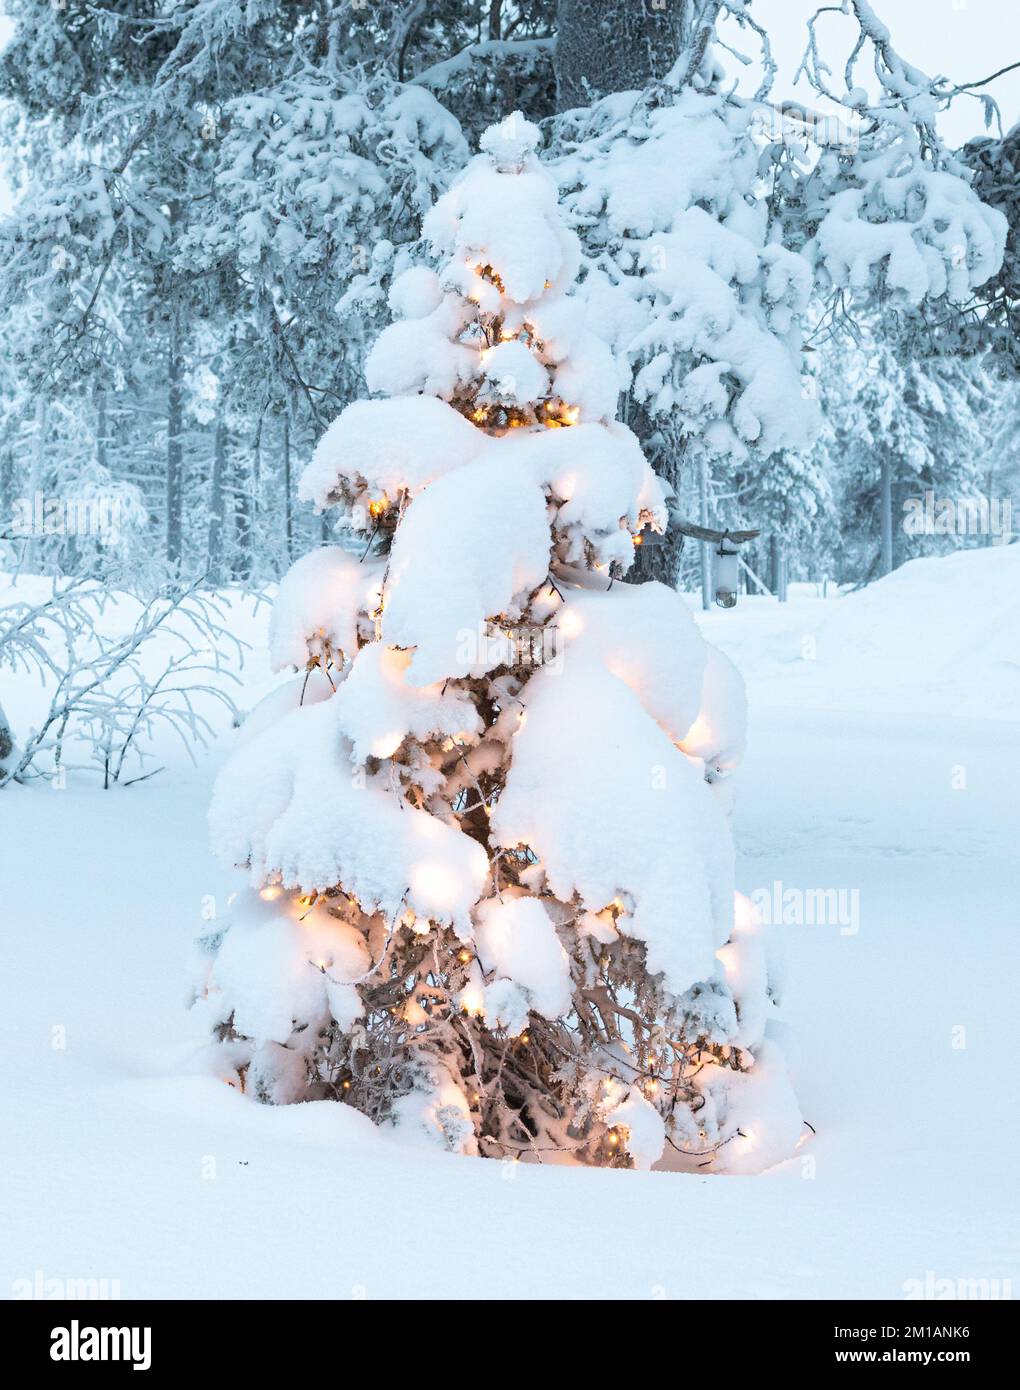 Snowy fir tree decorated with Christmas lights in the garden. Stock Photo